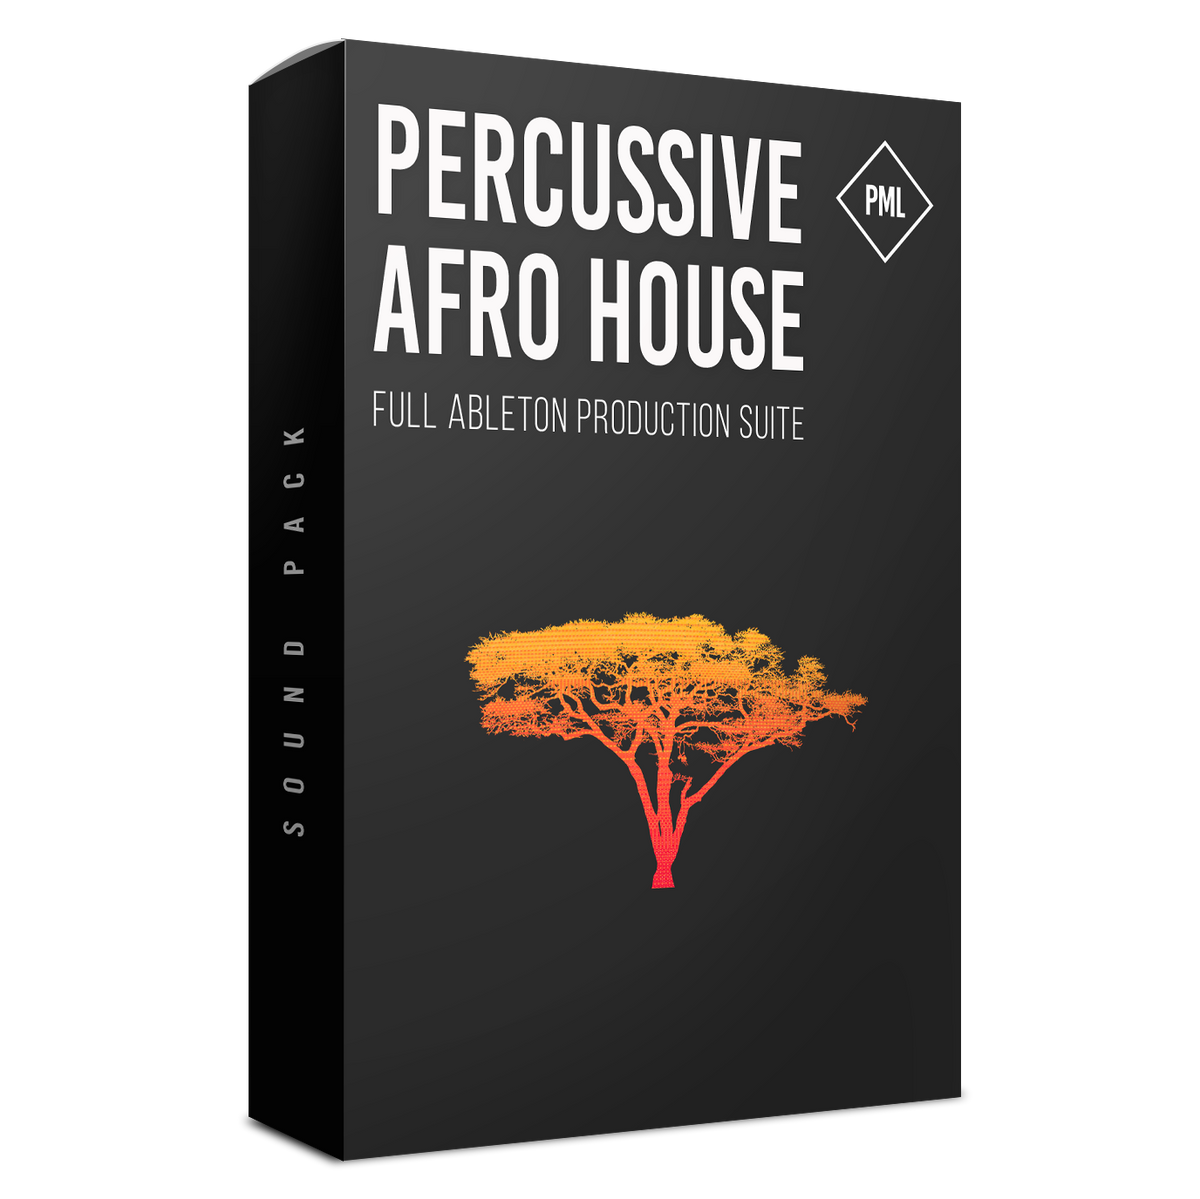 Percussive Afro House - Full Ableton Production Suite Product Box